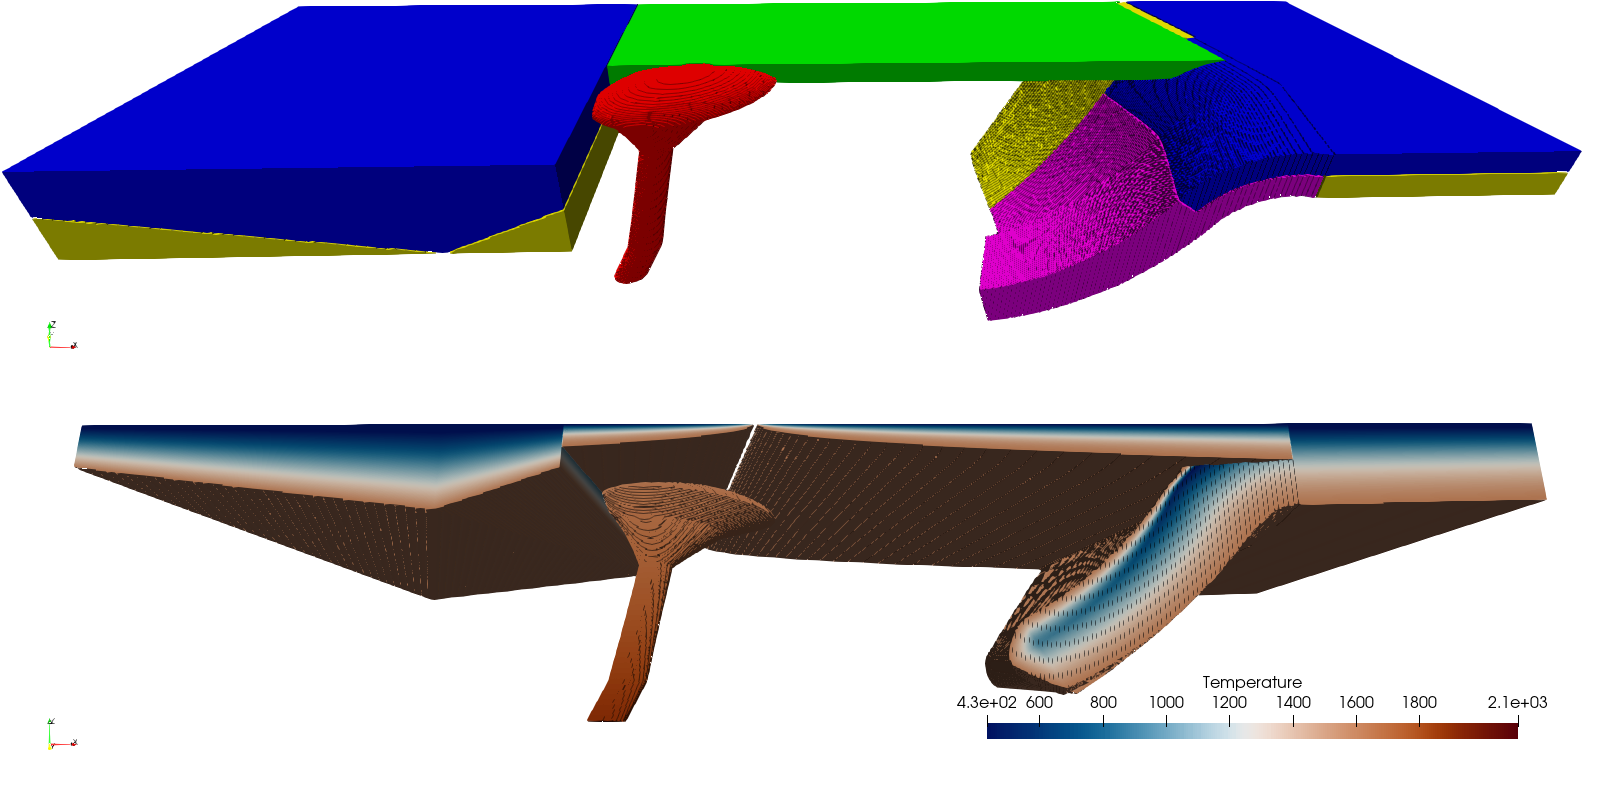 The resulting model from the first tutorial